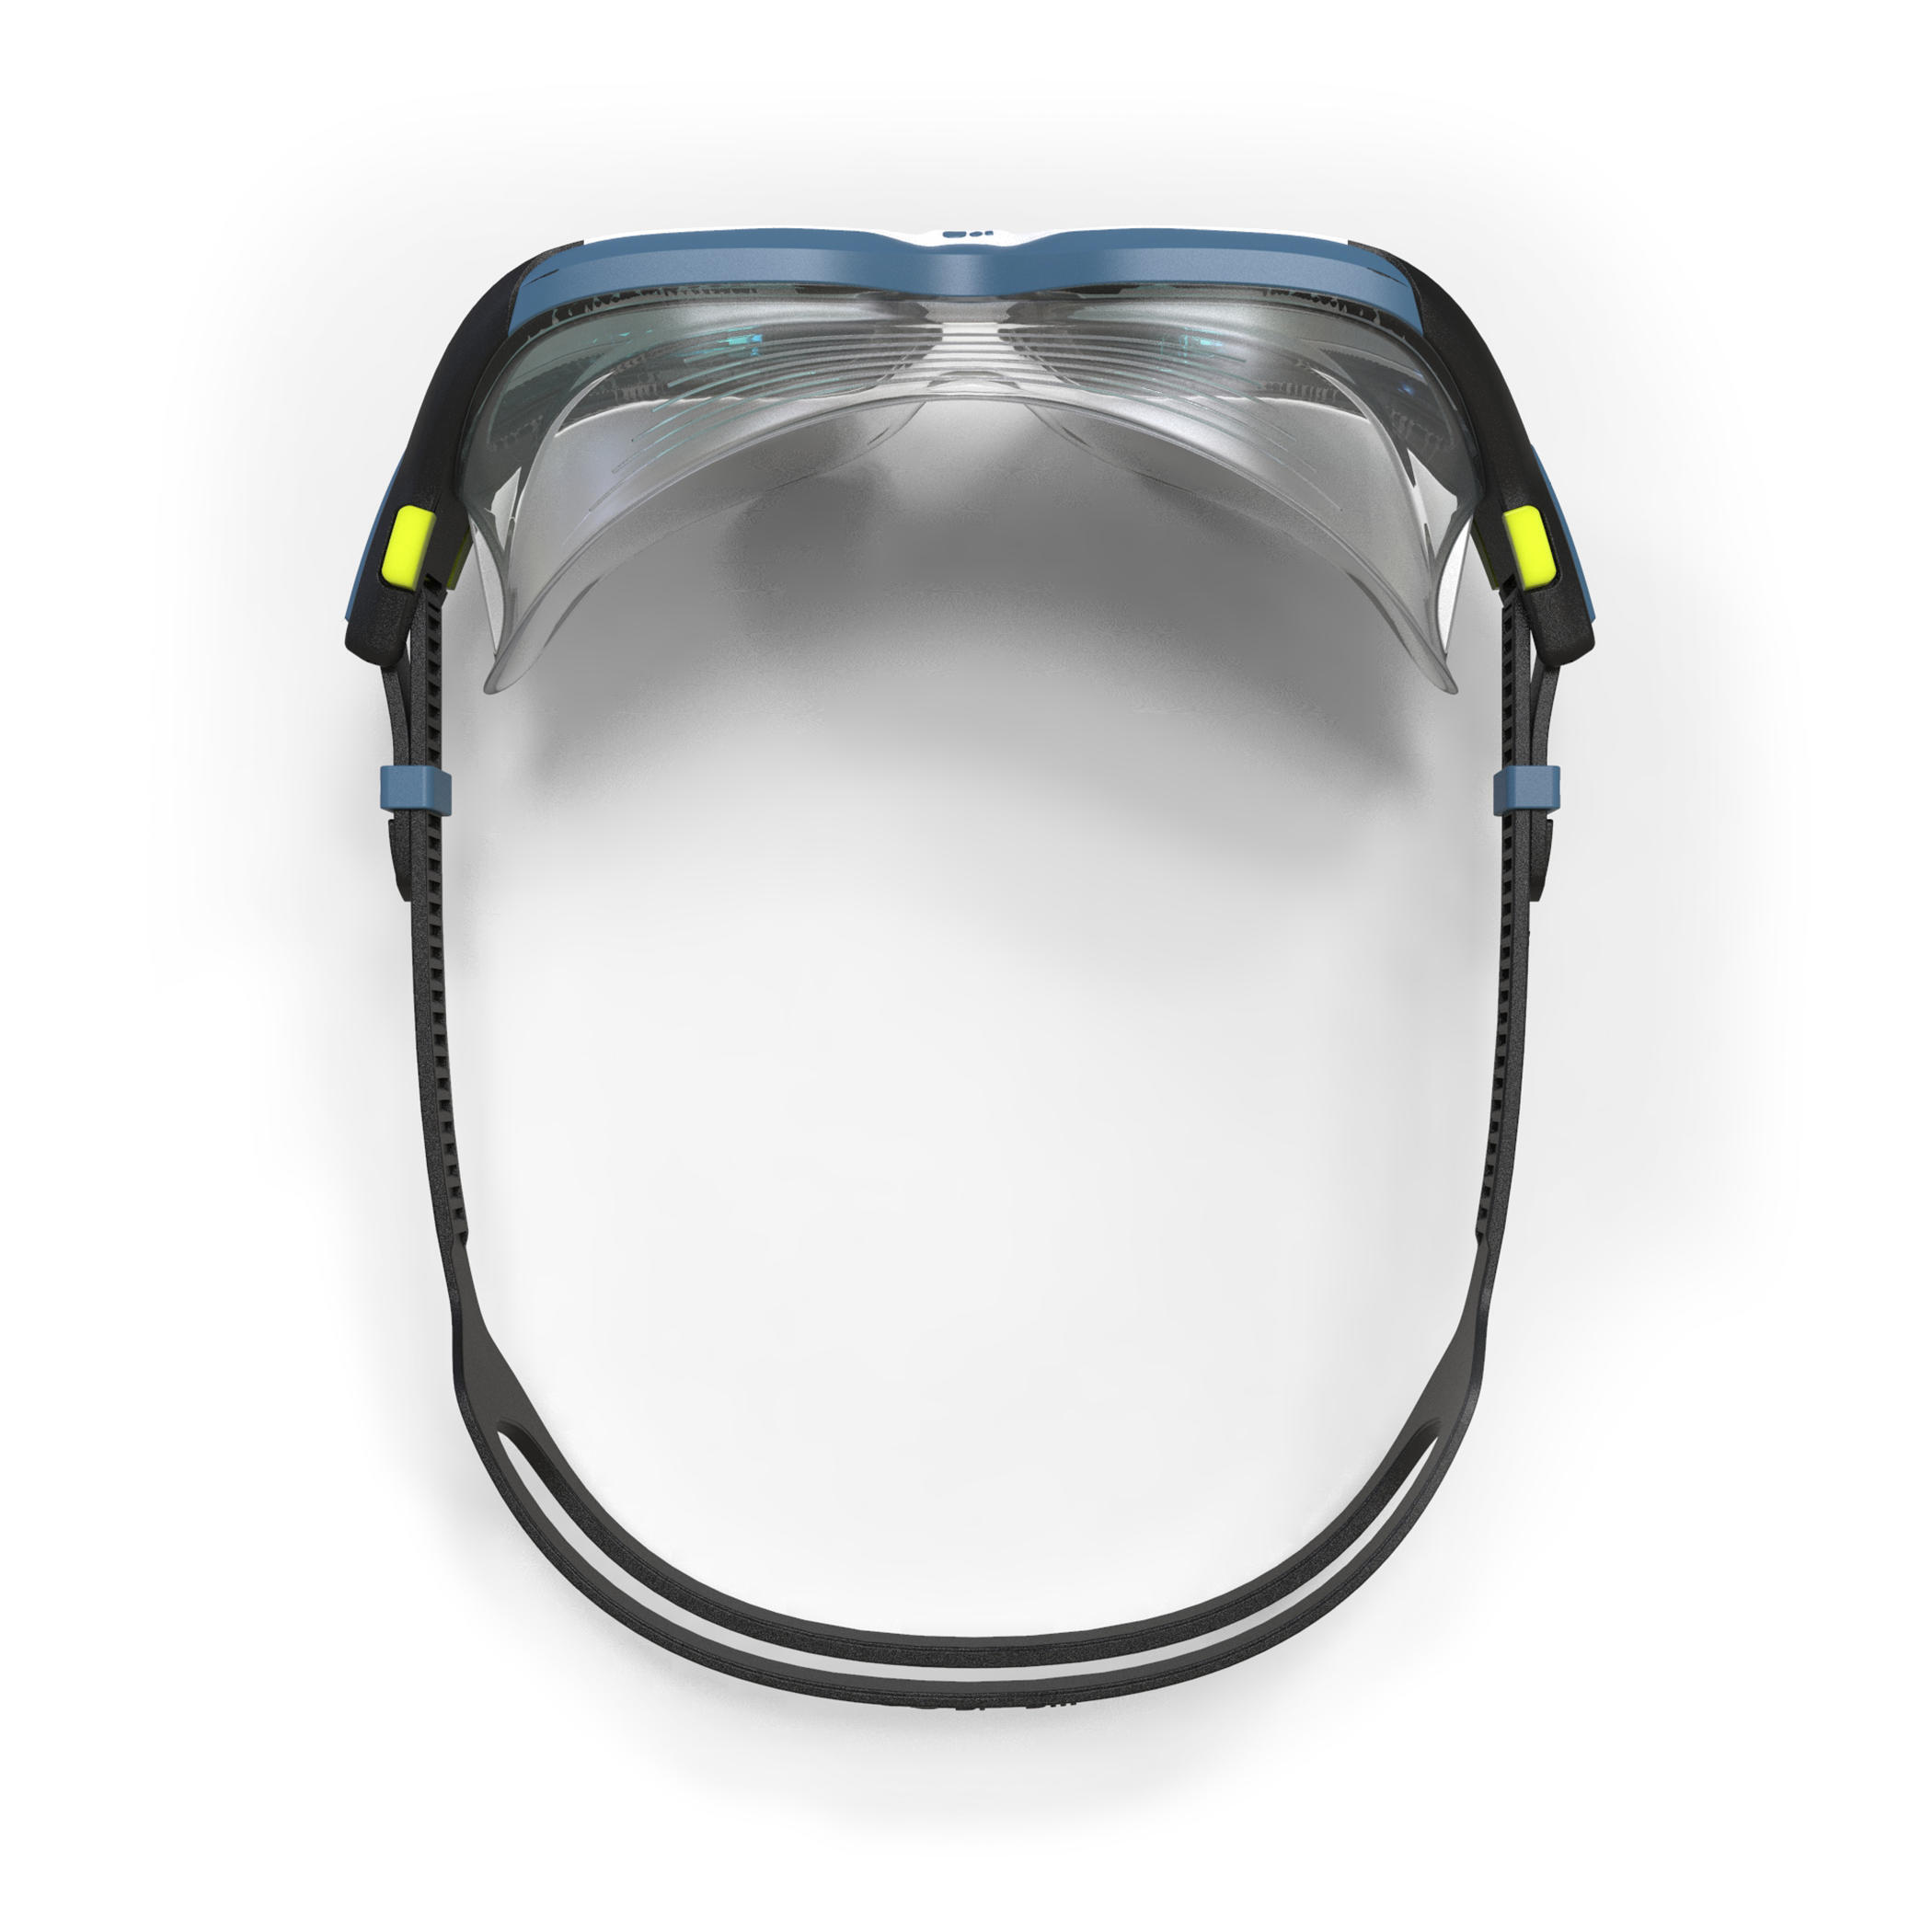 Swimming mask ACTIVE - Mirrored lenses - Size large - Black blue 4/5